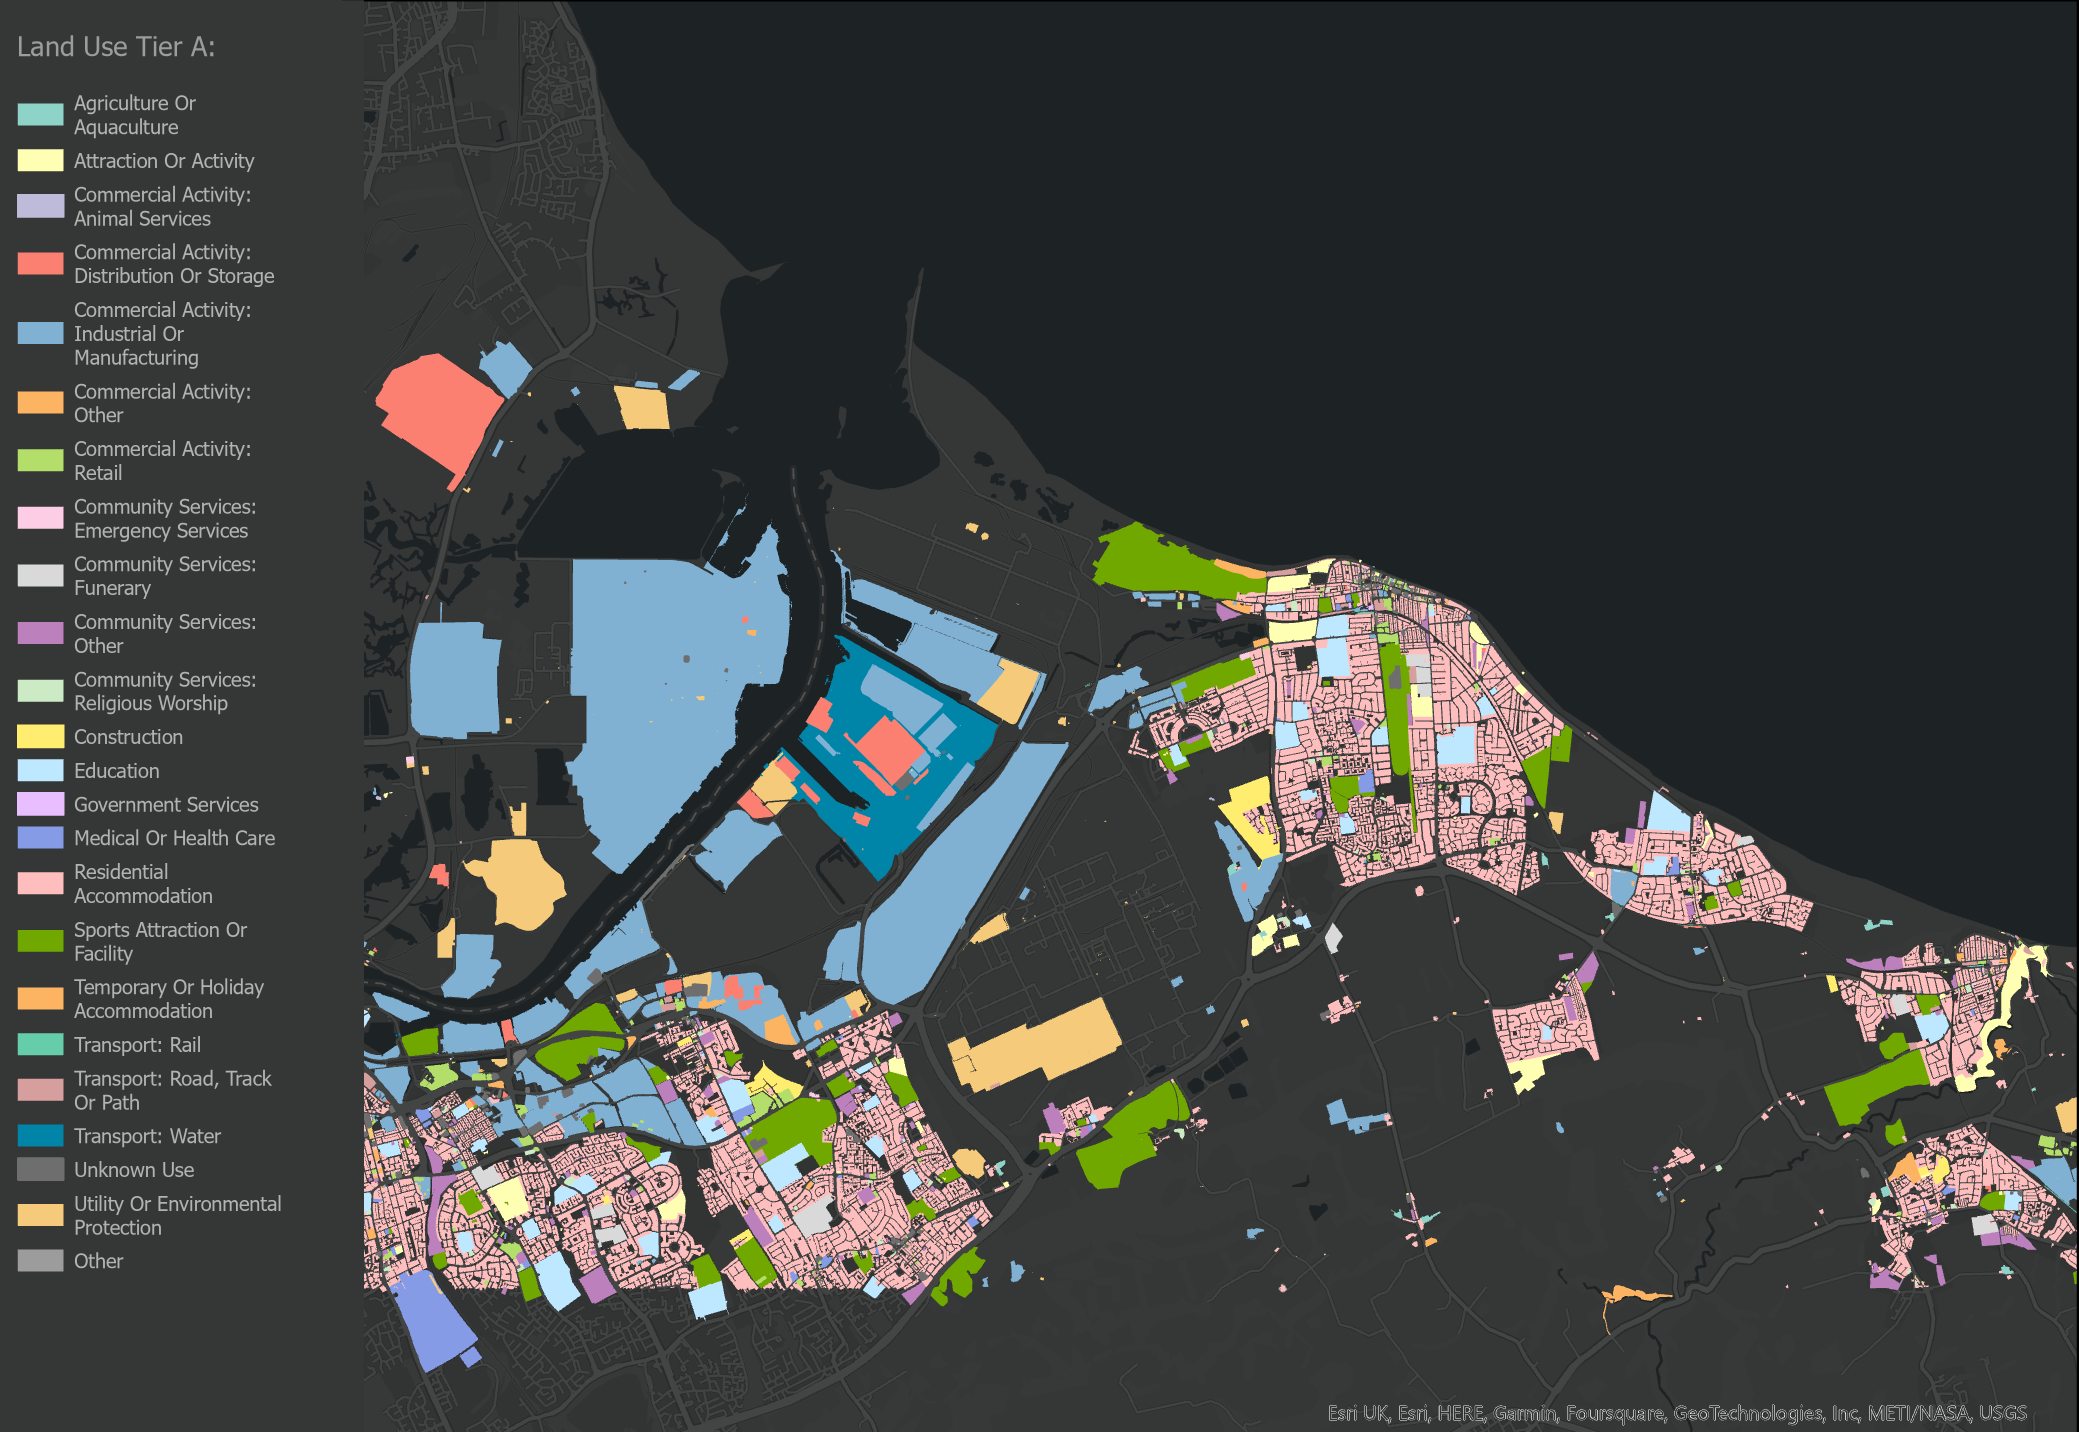 Fig 1: OS NGD Tier A Land Use in Middlesbrough (Small Area). 